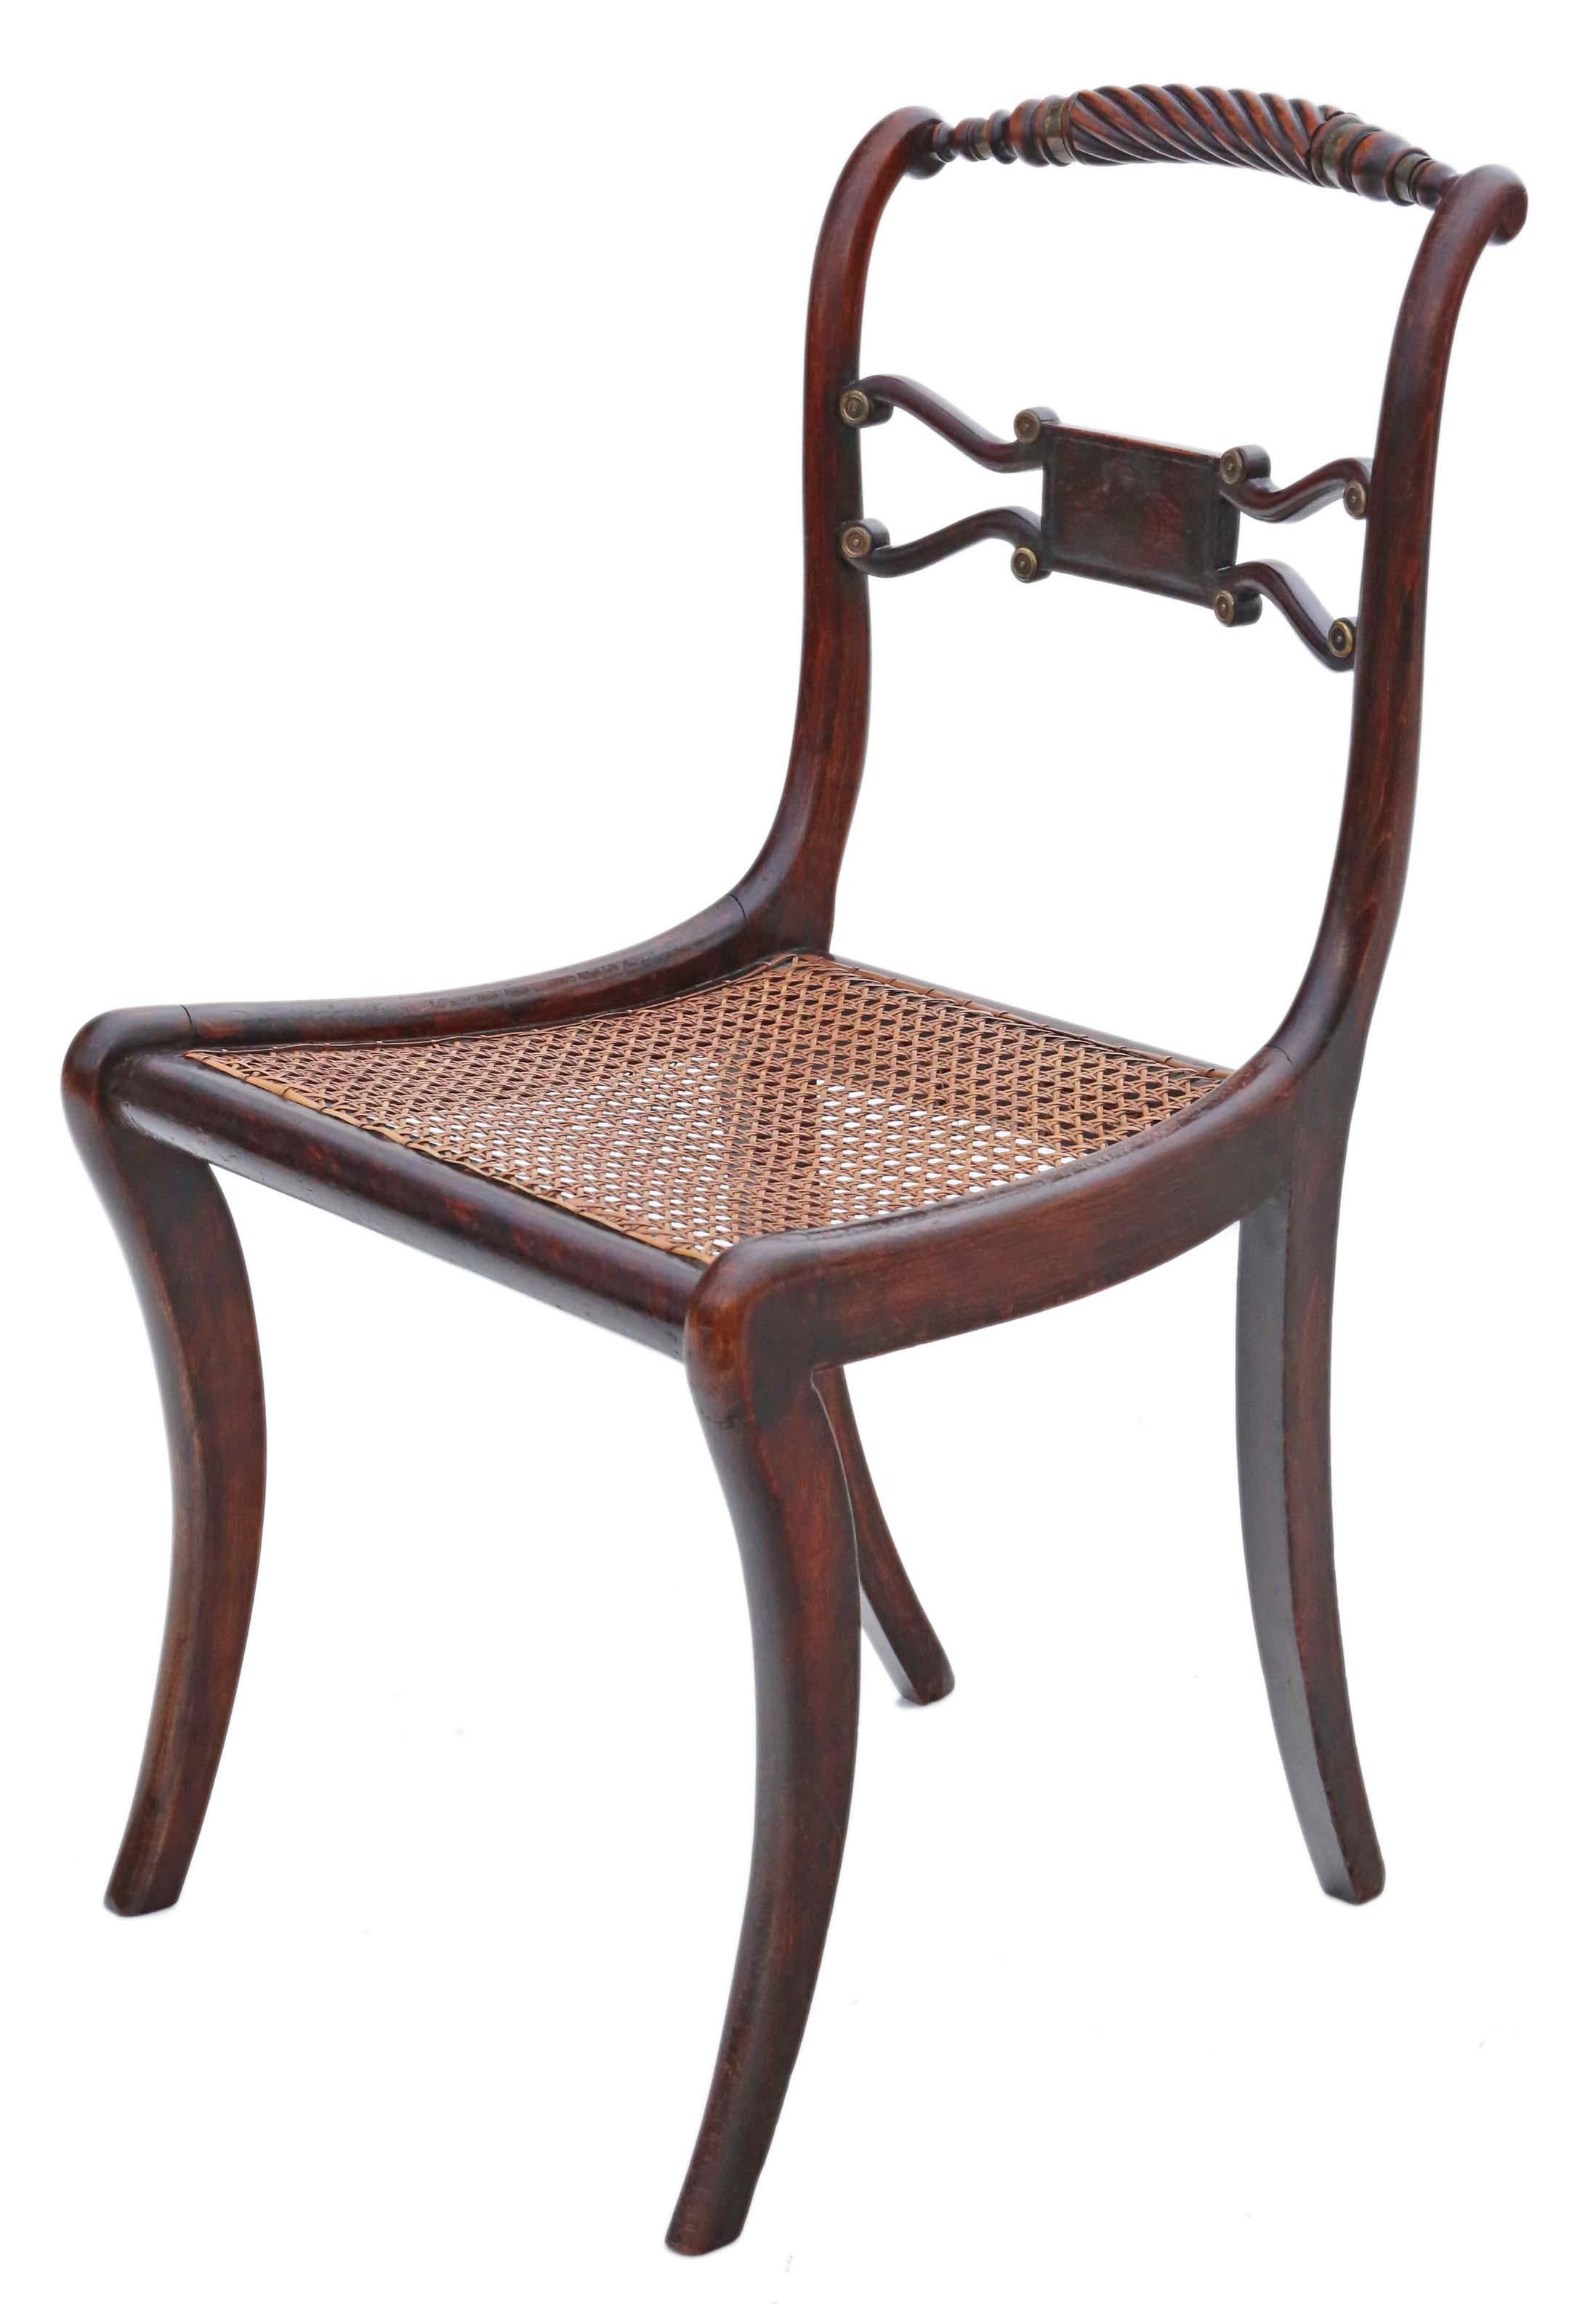 Early 19th Century Regency Faux Rosewood Dining Chairs: Set of 8, Antique Quality, 19th Century